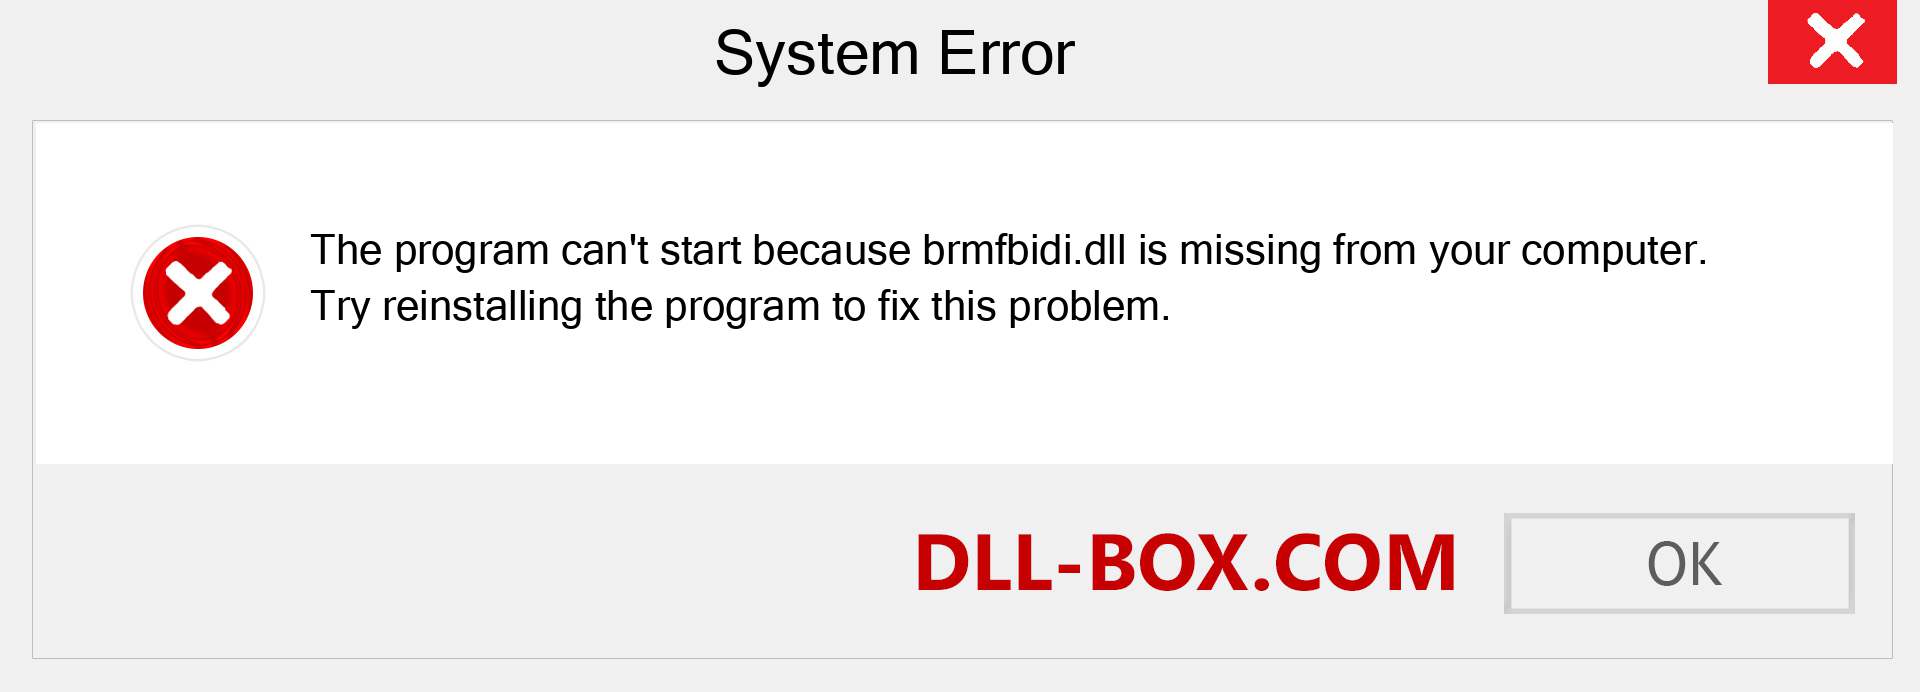  brmfbidi.dll file is missing?. Download for Windows 7, 8, 10 - Fix  brmfbidi dll Missing Error on Windows, photos, images